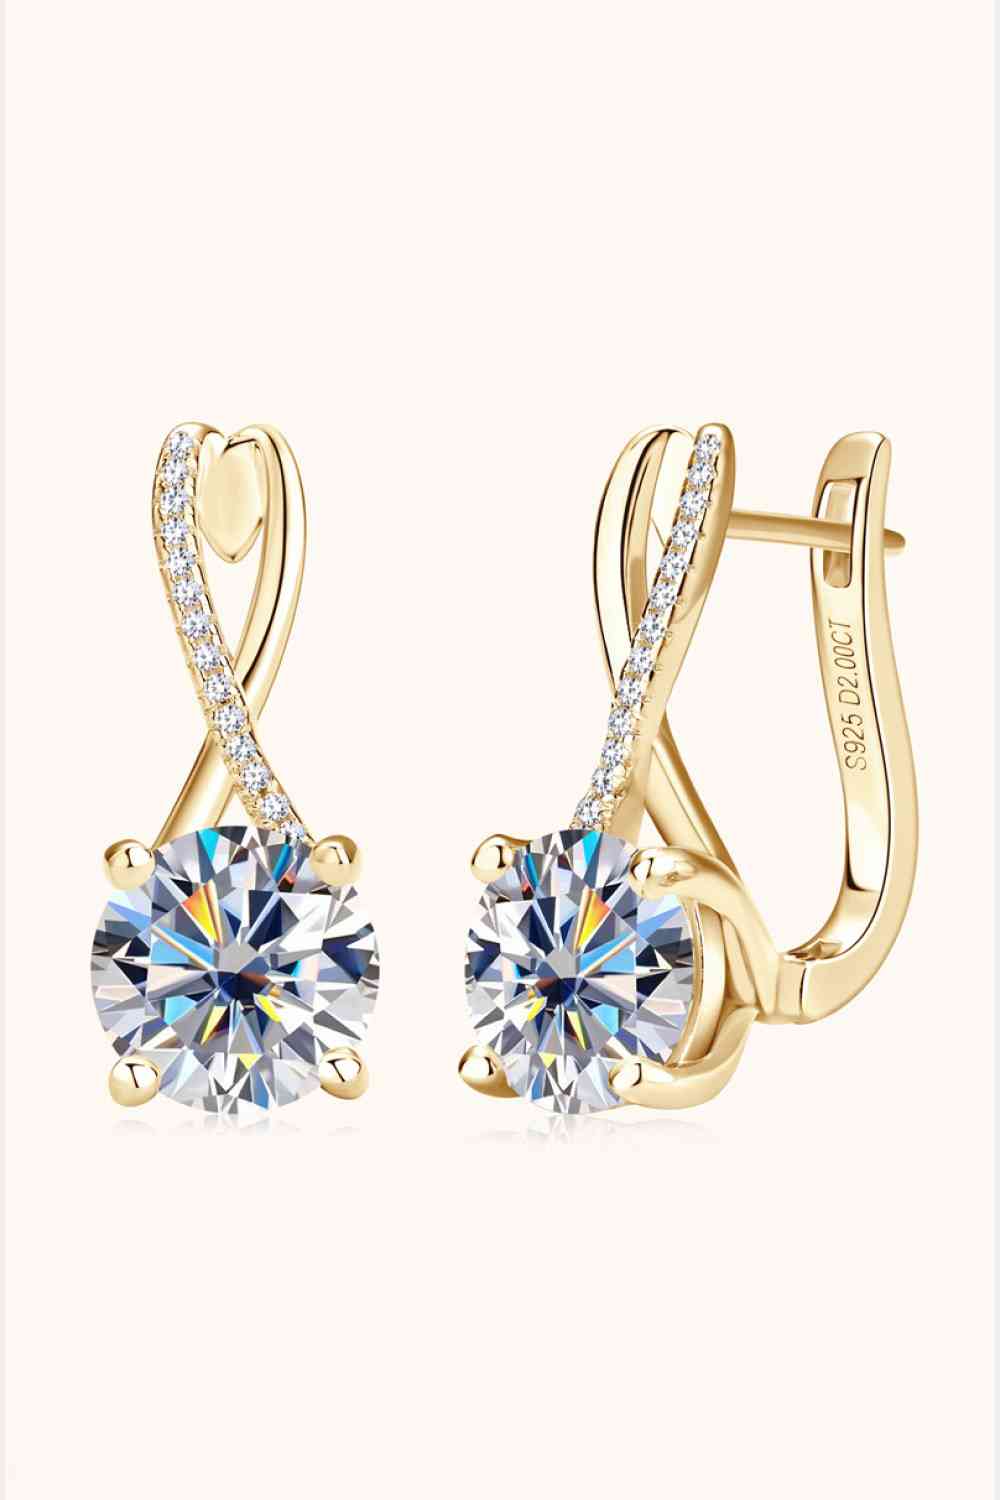 a pair of gold tone earrings with a crystal center